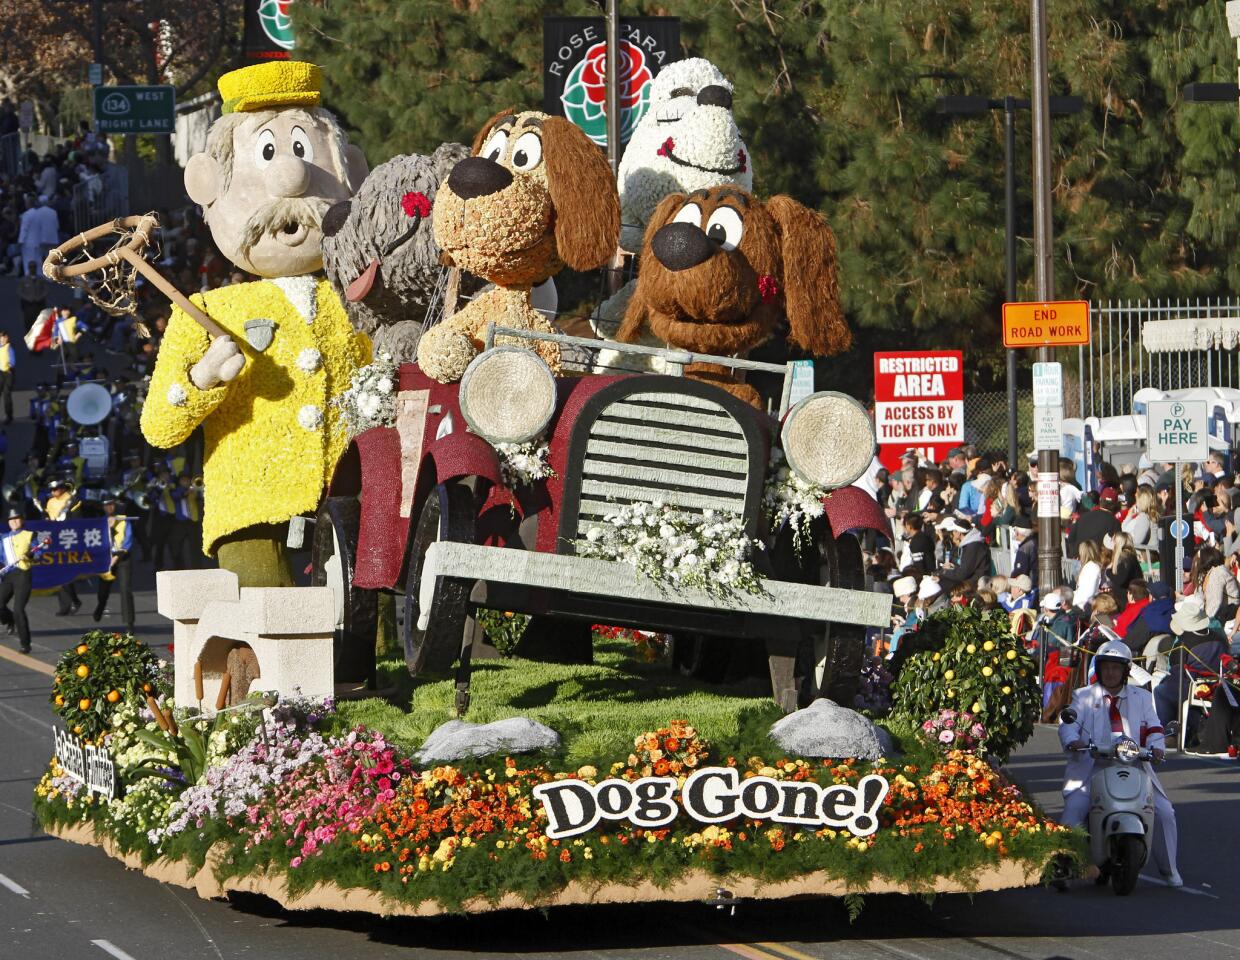 The La Canada Flintridge float "Dog Gone!" won the Bob Hope Humor award for most comical and amusing entry at the 2014 Rose Parade in Pasadena on Wednesday, January 1, 2014.